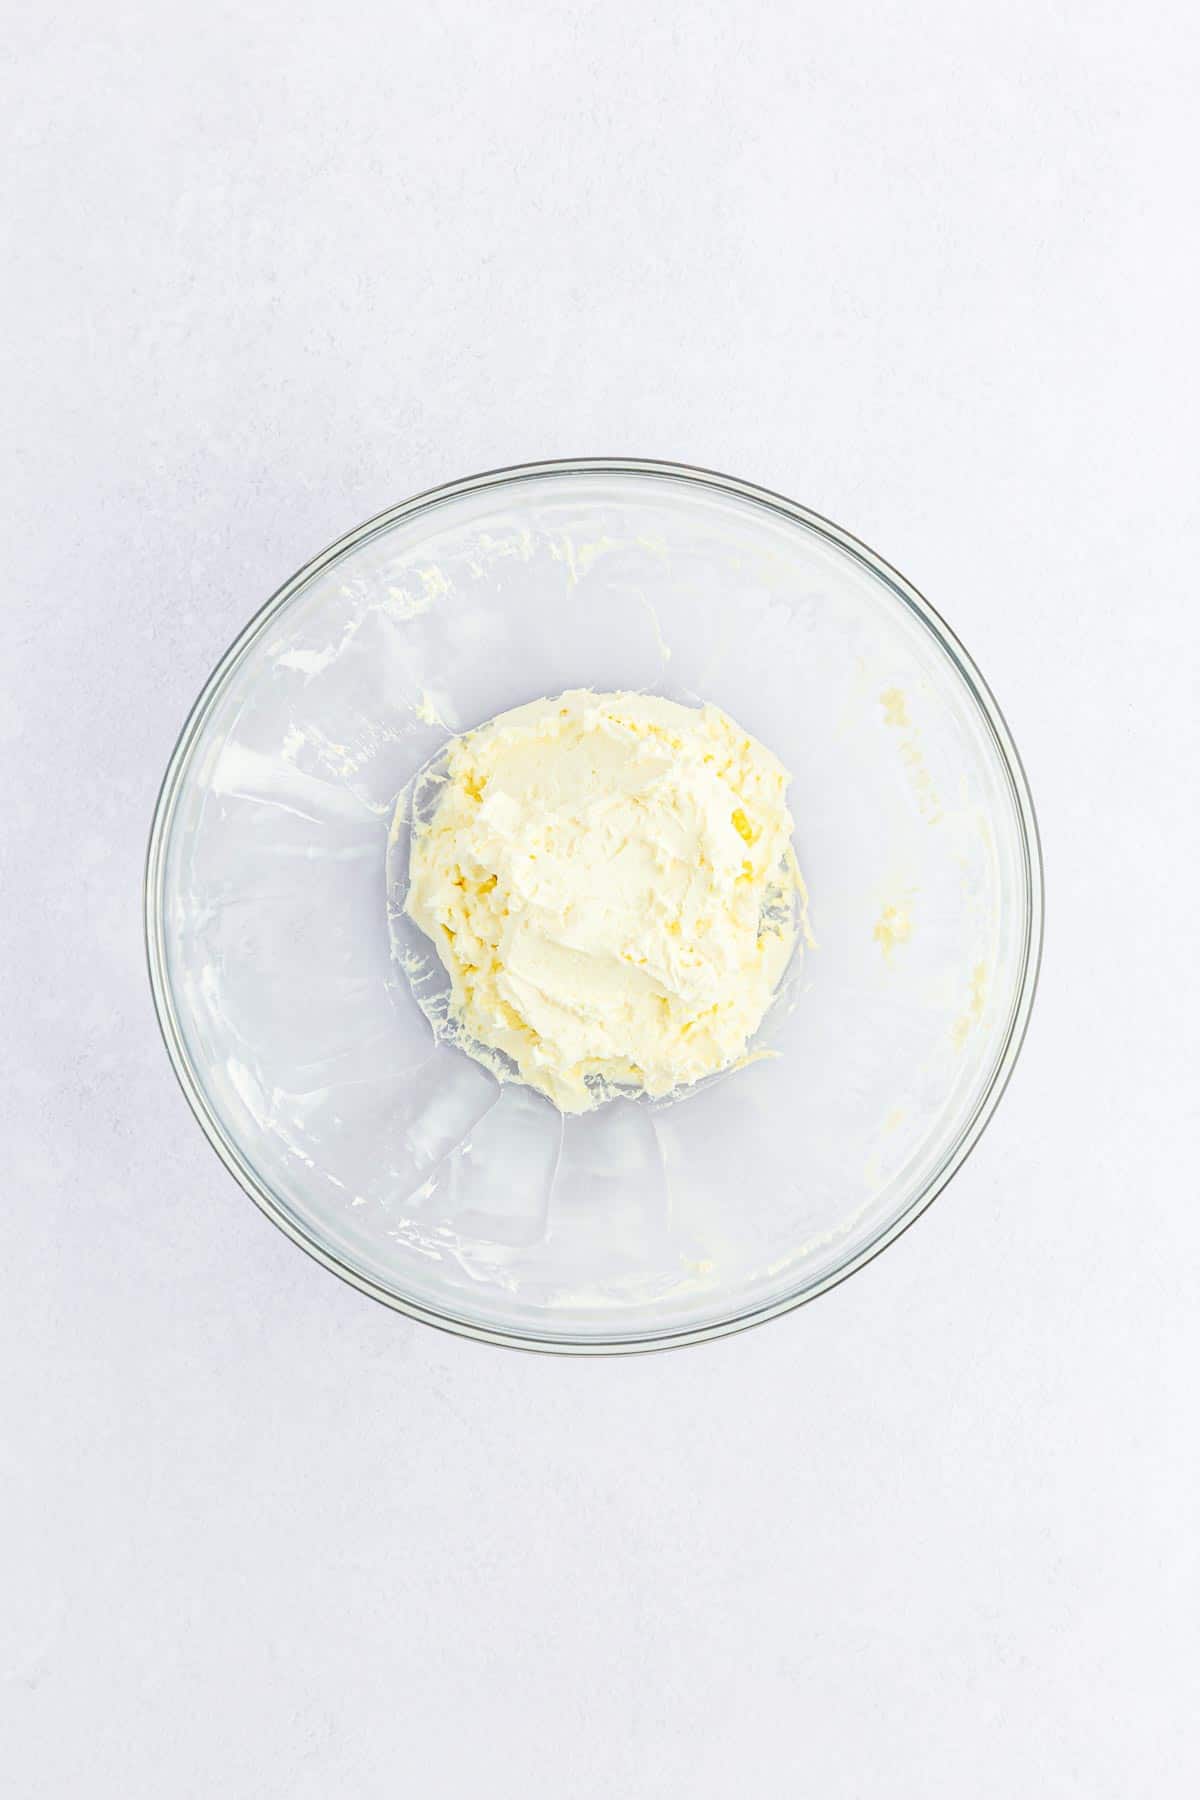 Cream cheese for carrot cake balls in a glass mixing bowl.